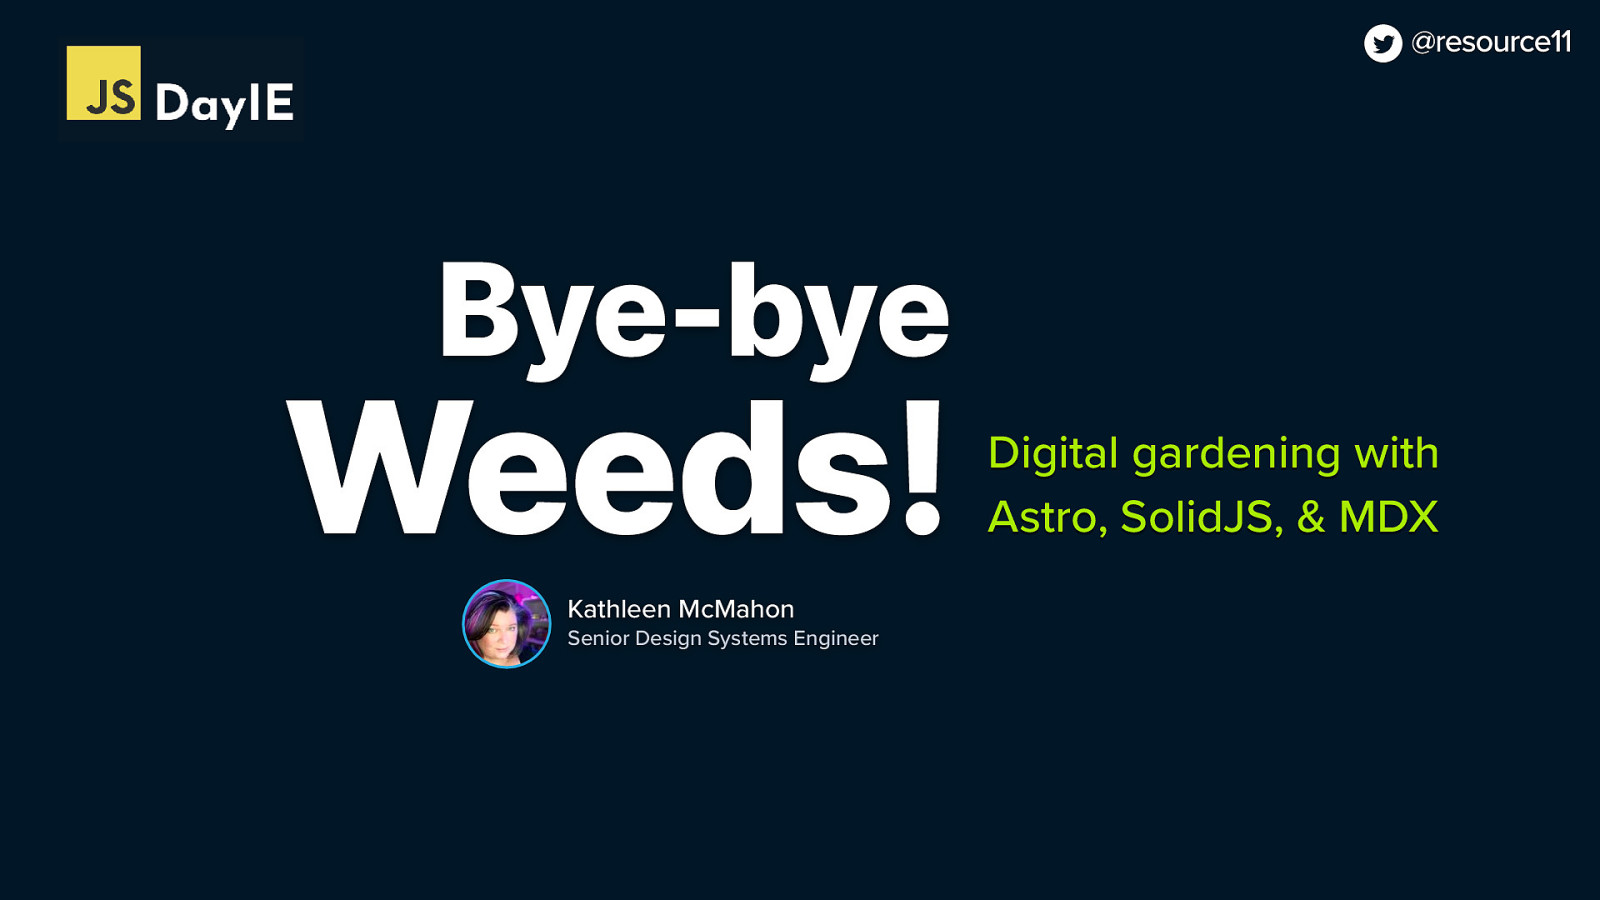 Bye-bye Weeds! Digital Gardening with Astro, SolidJS and MDX.